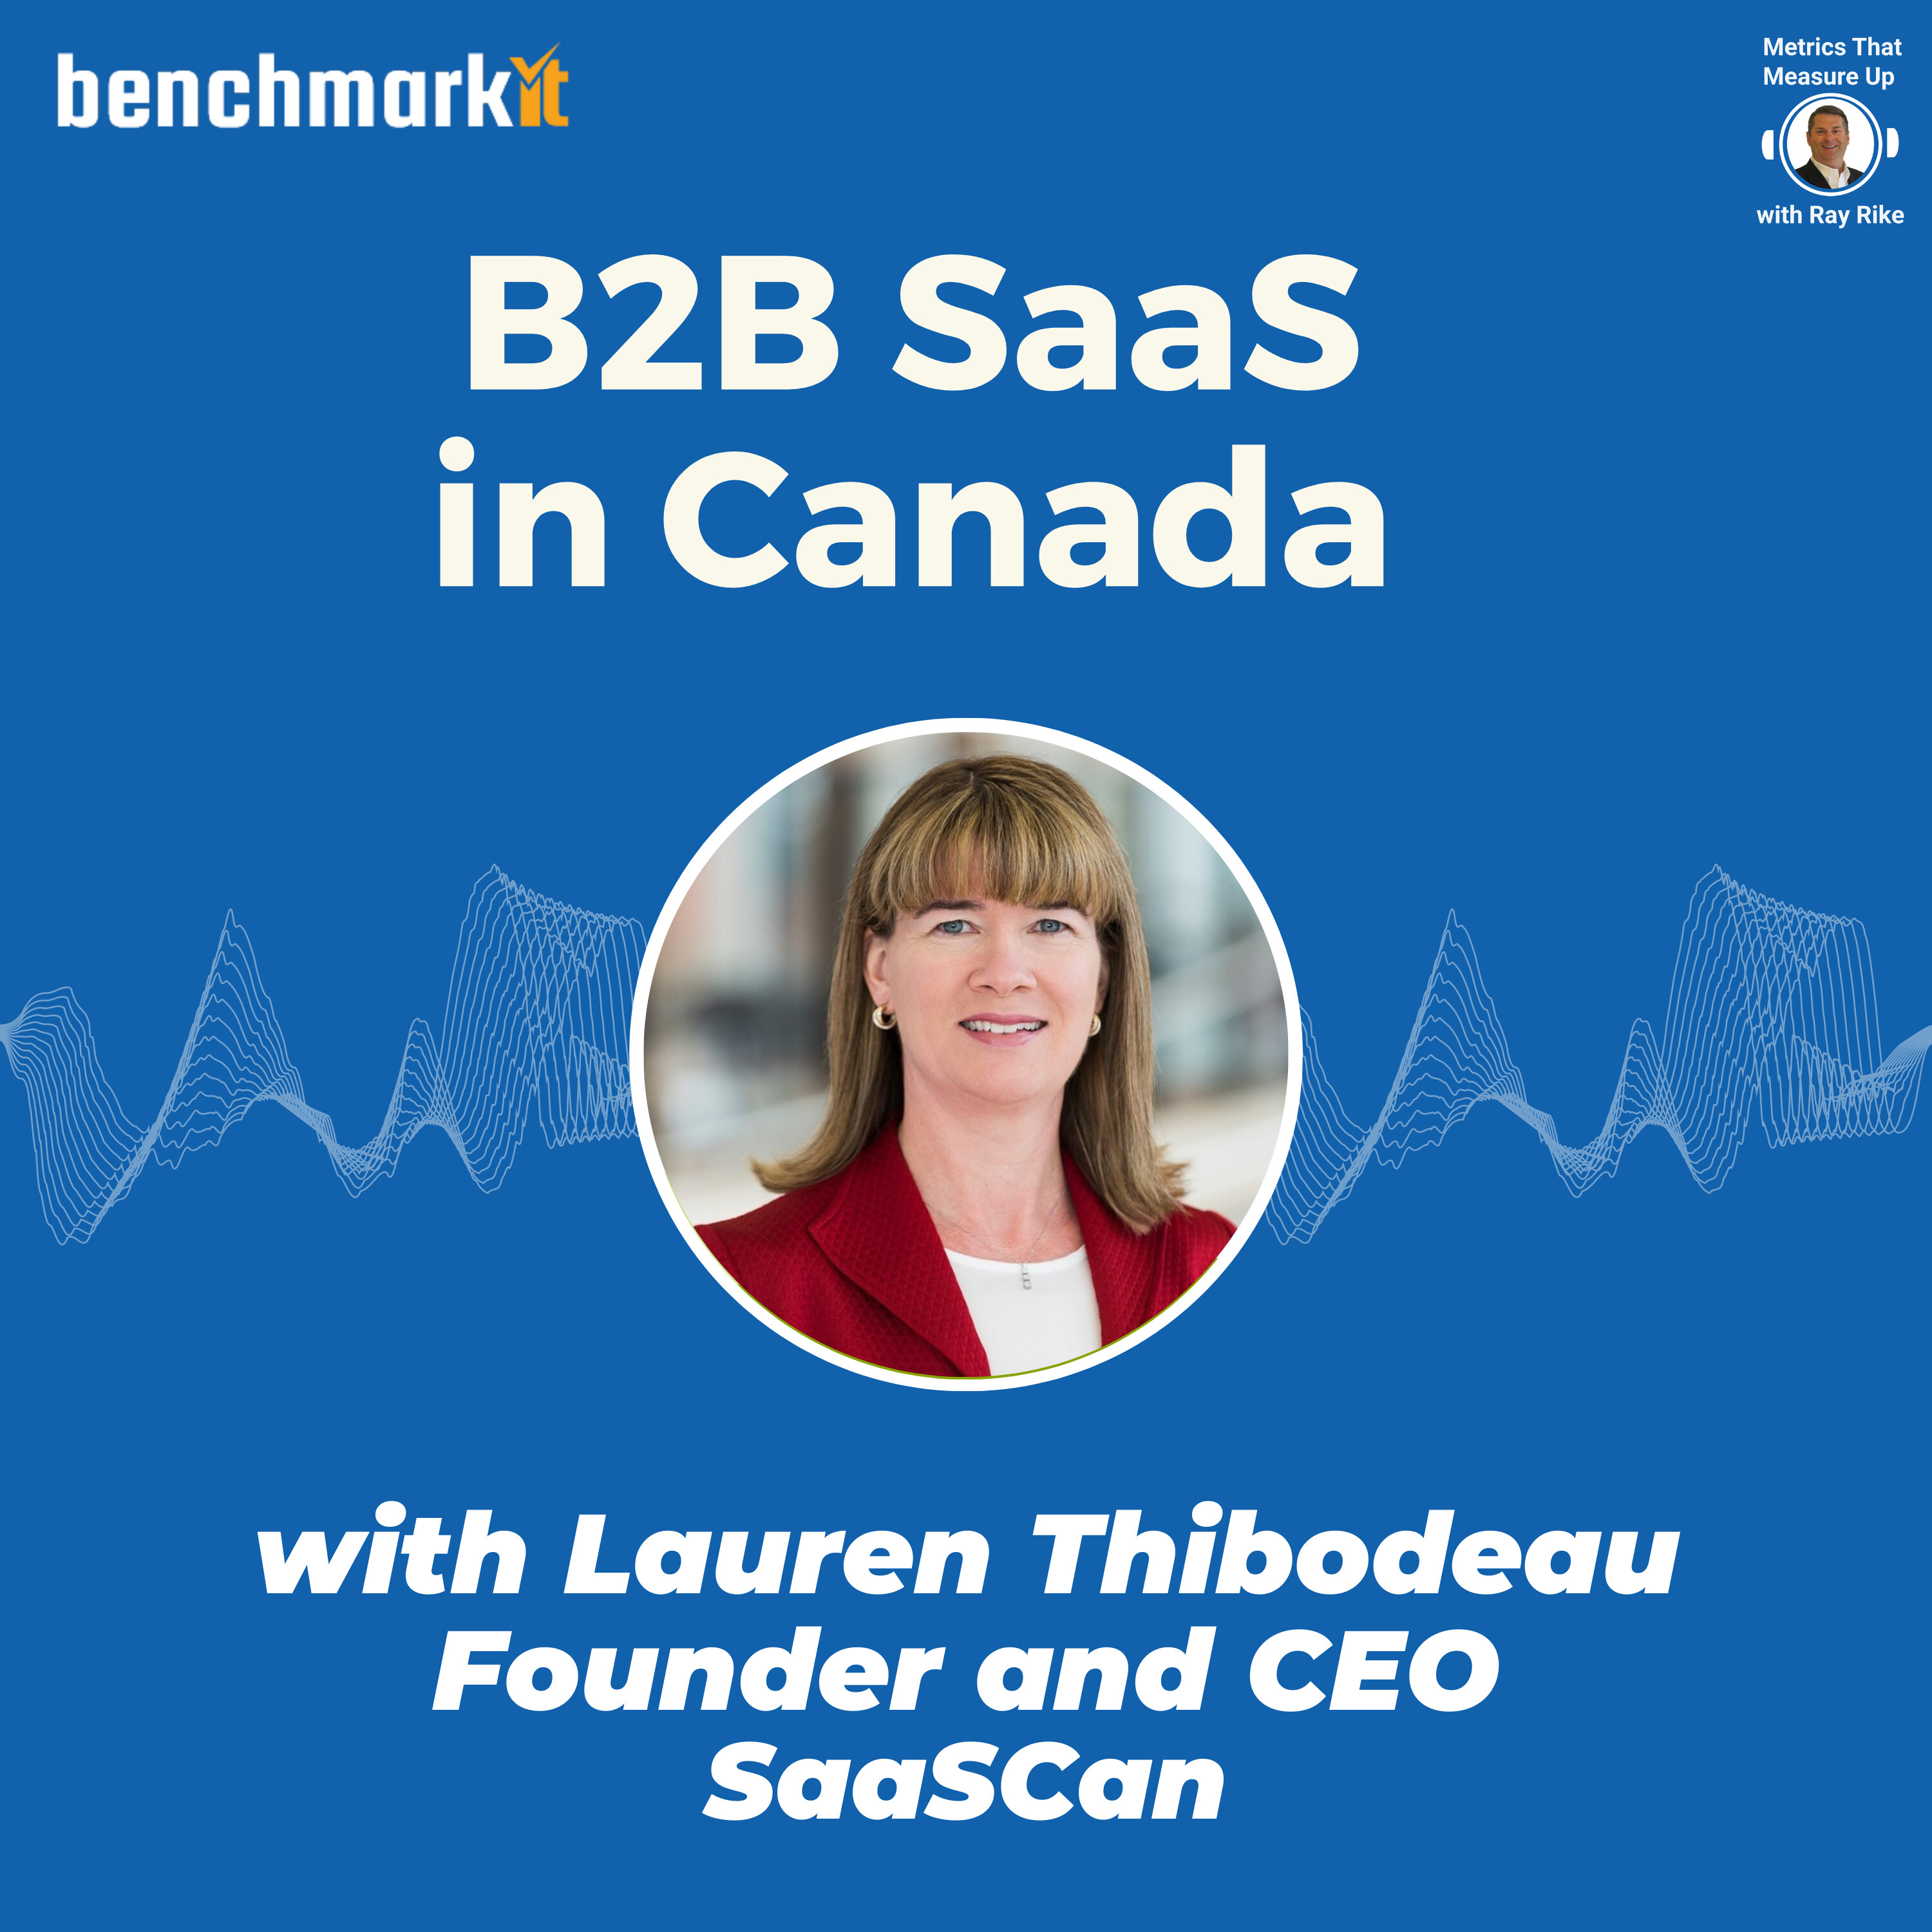 The SaaS Ecosystem in Canada - with Lauren Thibodeau, SaaSCan